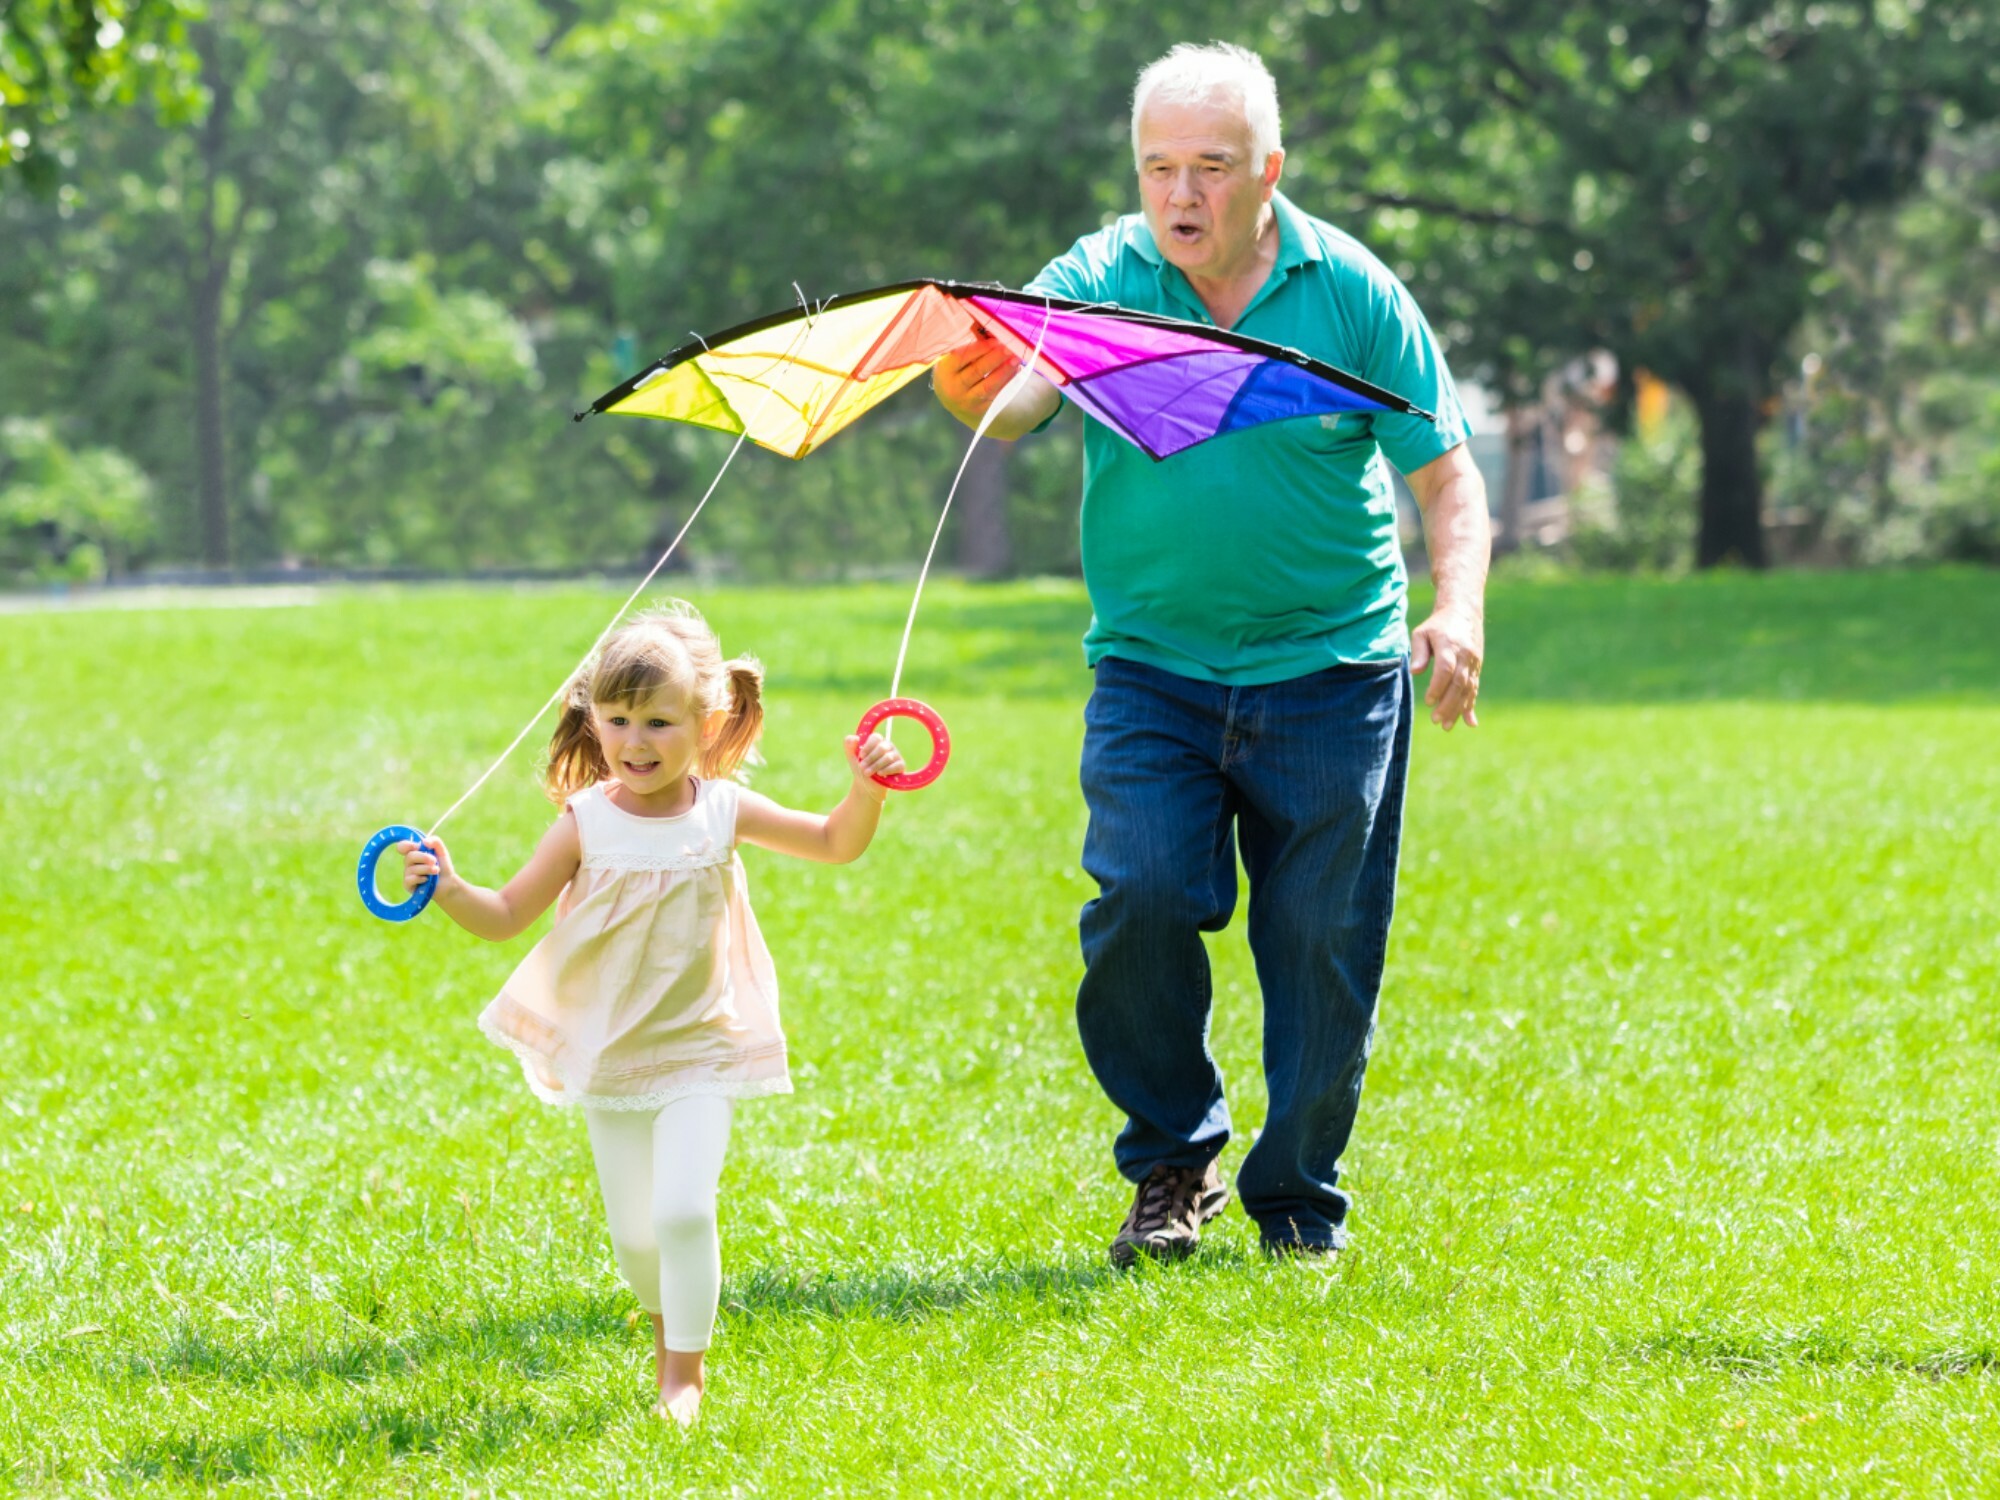 Grandfather and granddaughter playing with a kite together